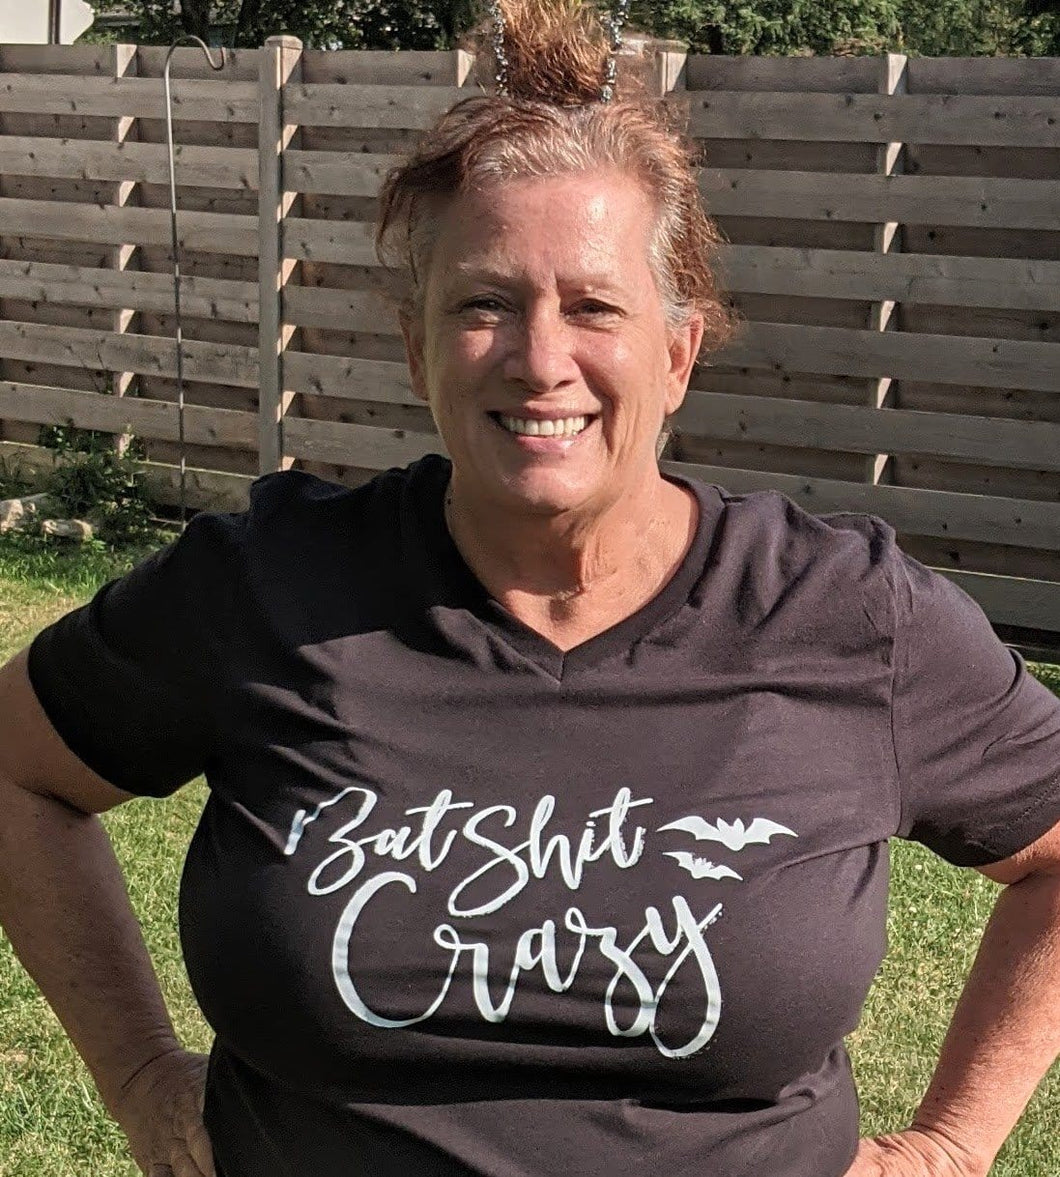 Here's the easiest Halloween costume yet!! This shirt tells them all who you are & what you're like LOL!! Wear it with a batty headband and you're all done!!!   Funny Bat Shit Crazy t-shirt  Unisex sizing. If u like tighter fit, buy one size smaller. Bella Canvas